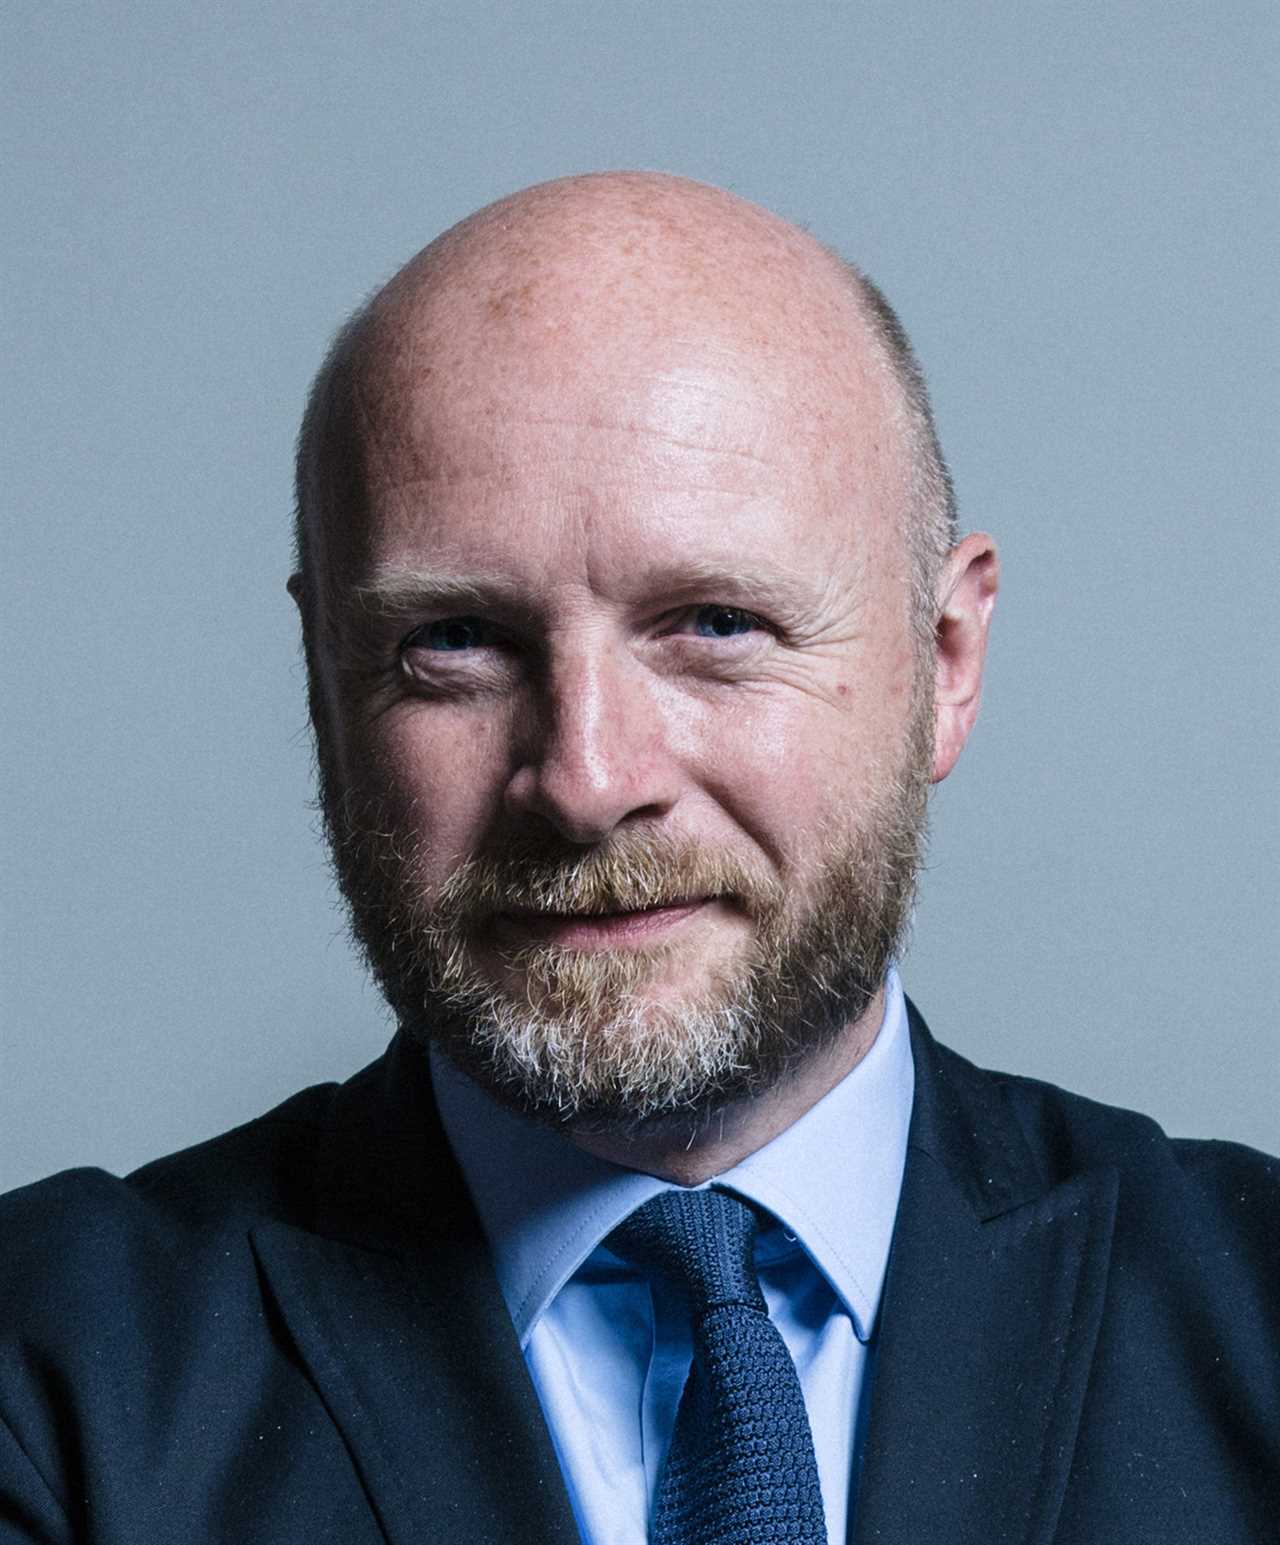 Labour MP Liam Byrne banned from Commons for bullying aide